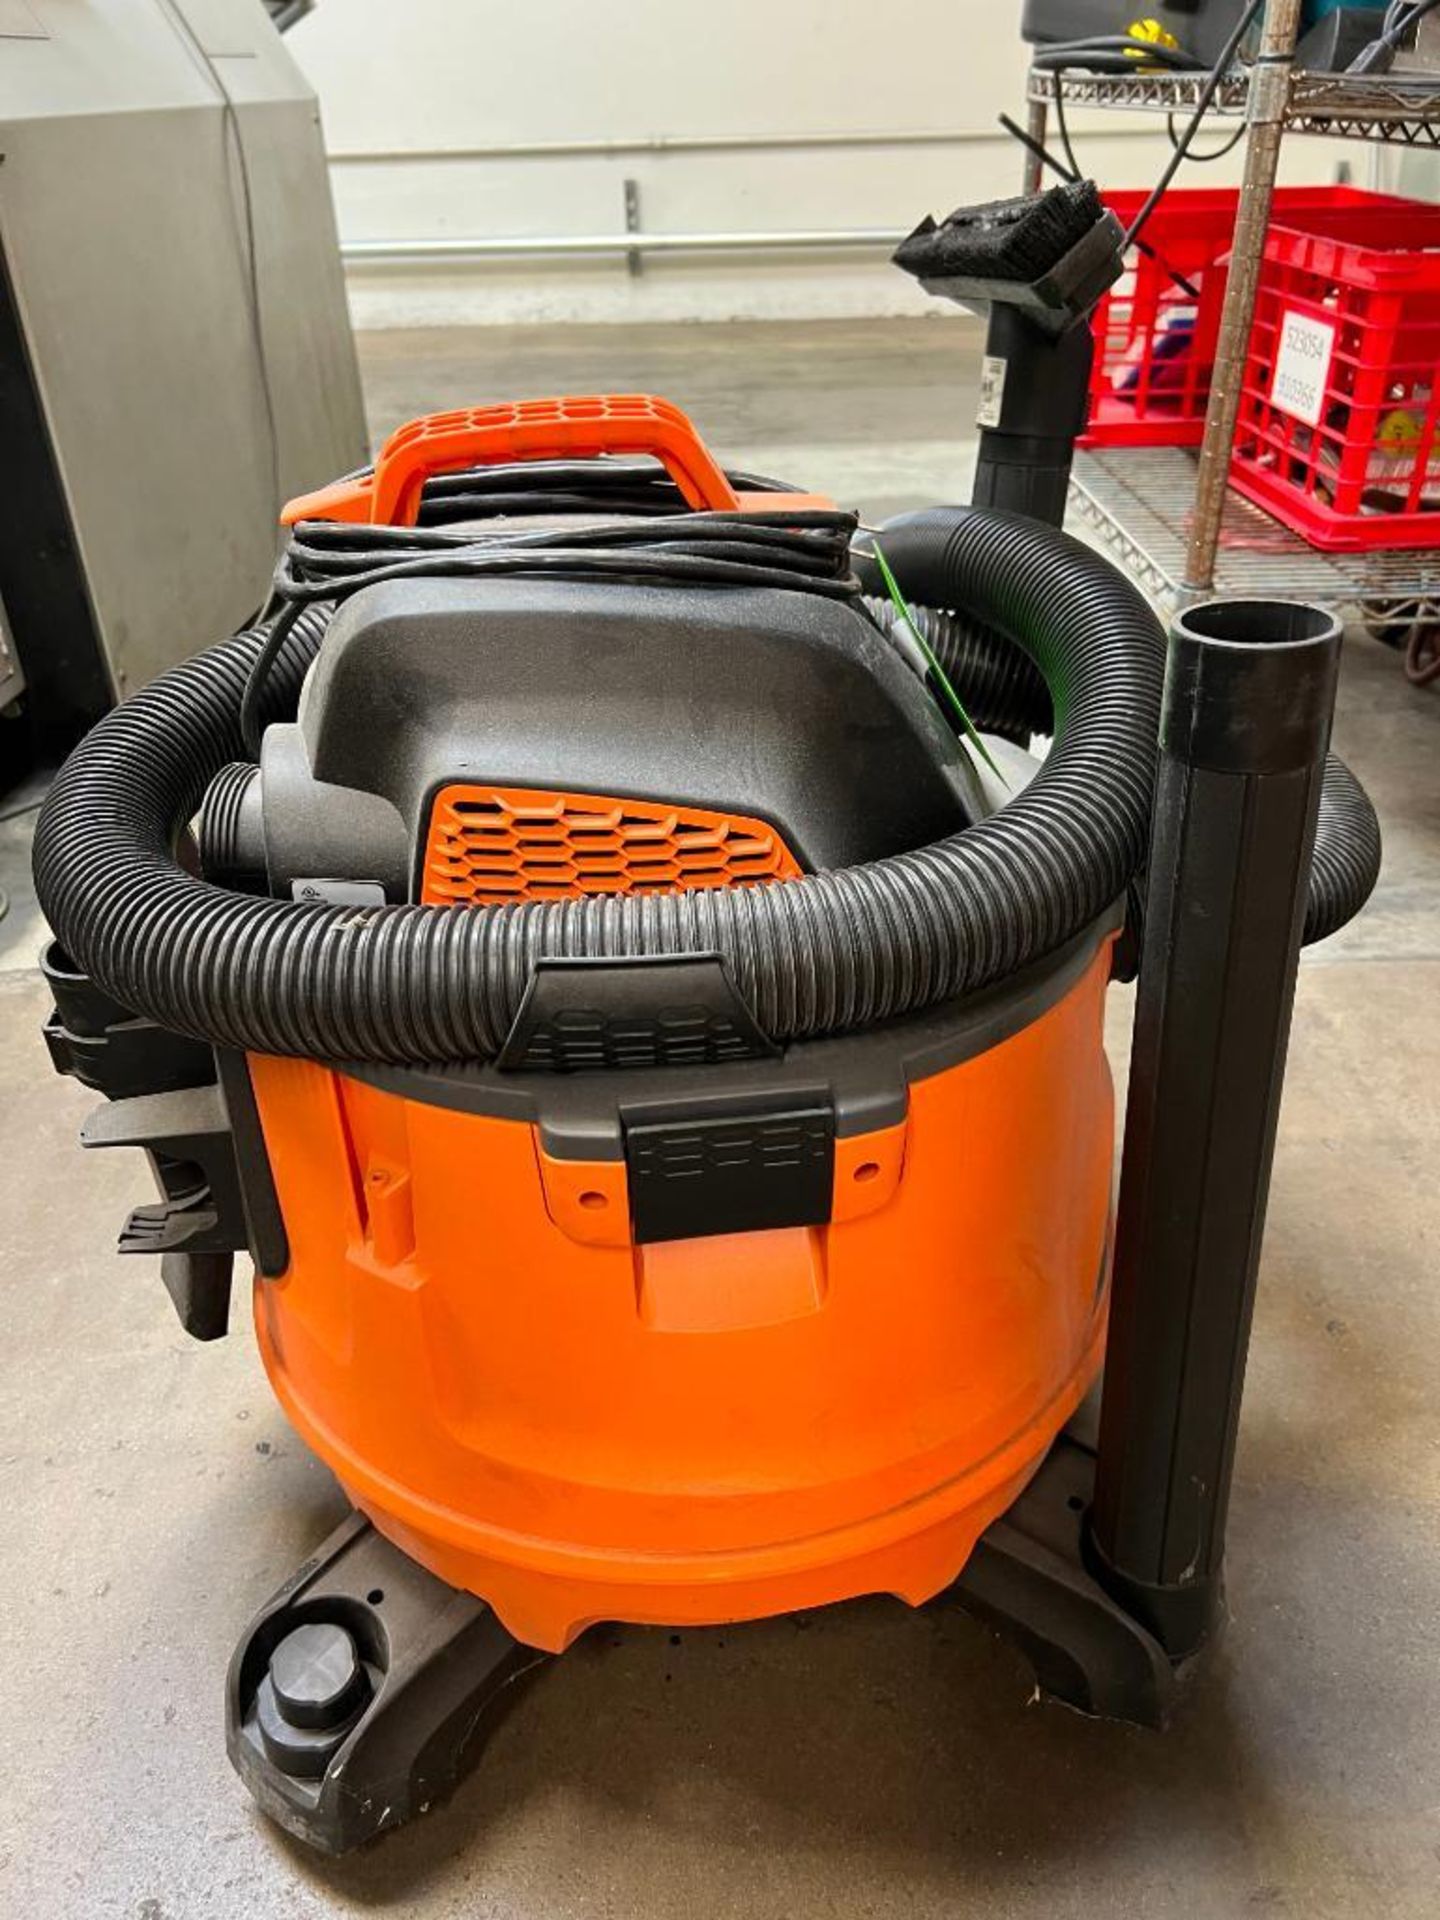 RIGID Shop Vacuum Cleaner (With Spare Hoses) - Image 2 of 3